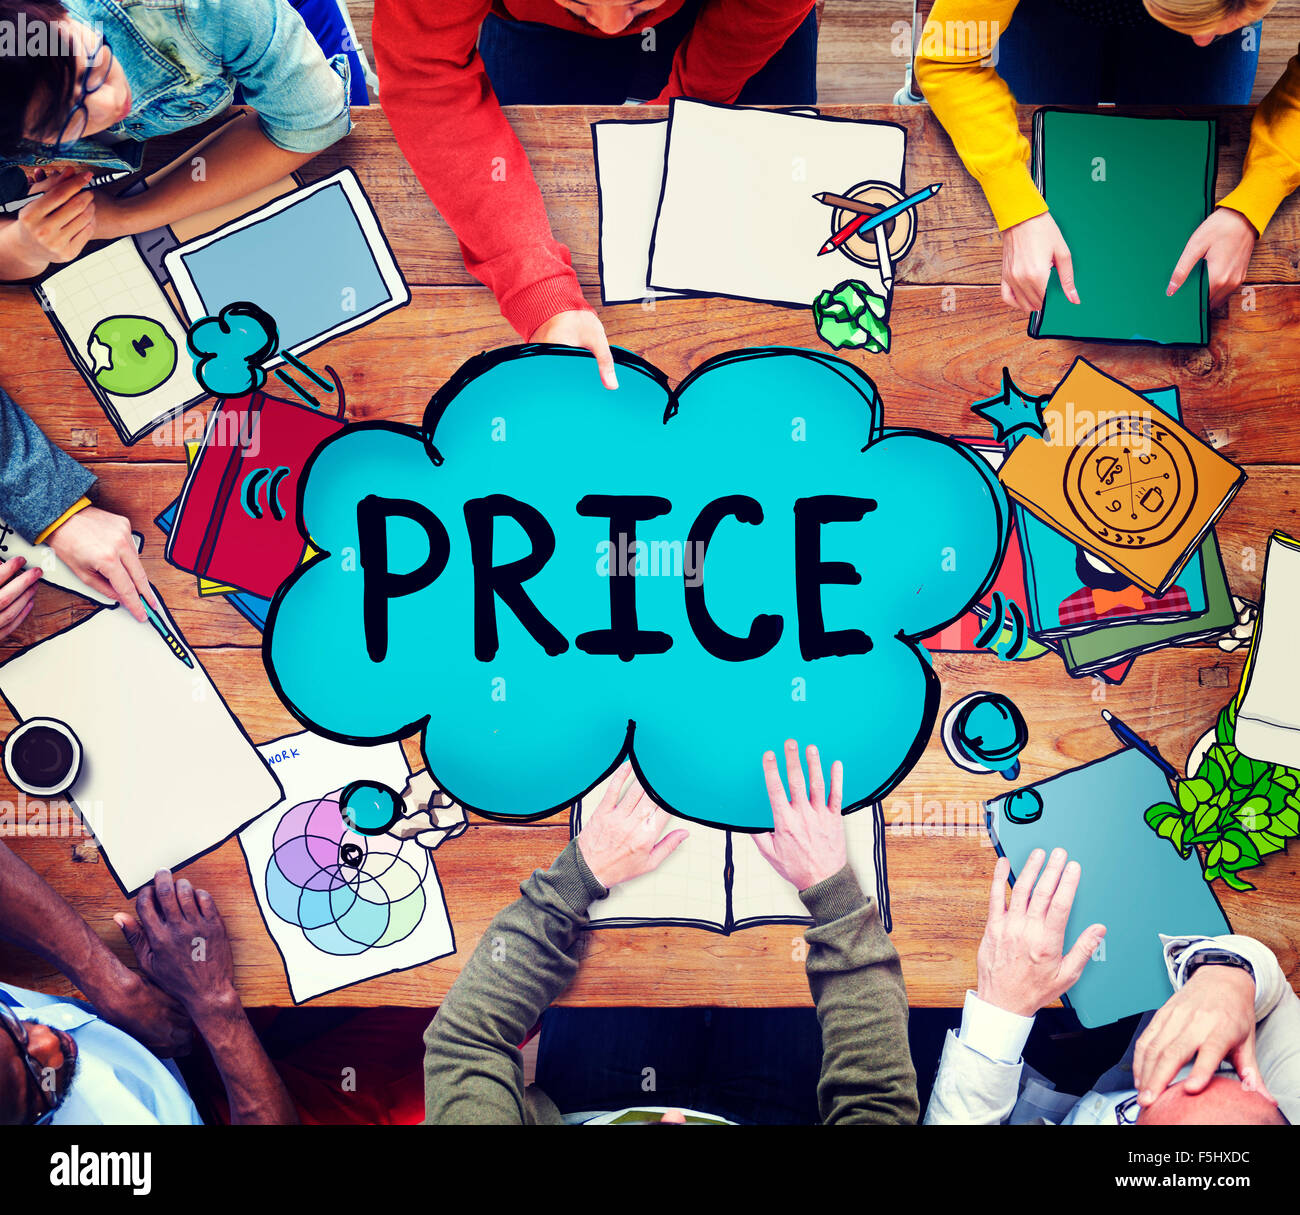 Price Cost Expense Money Rate Value Commerce Concept Stock Photo